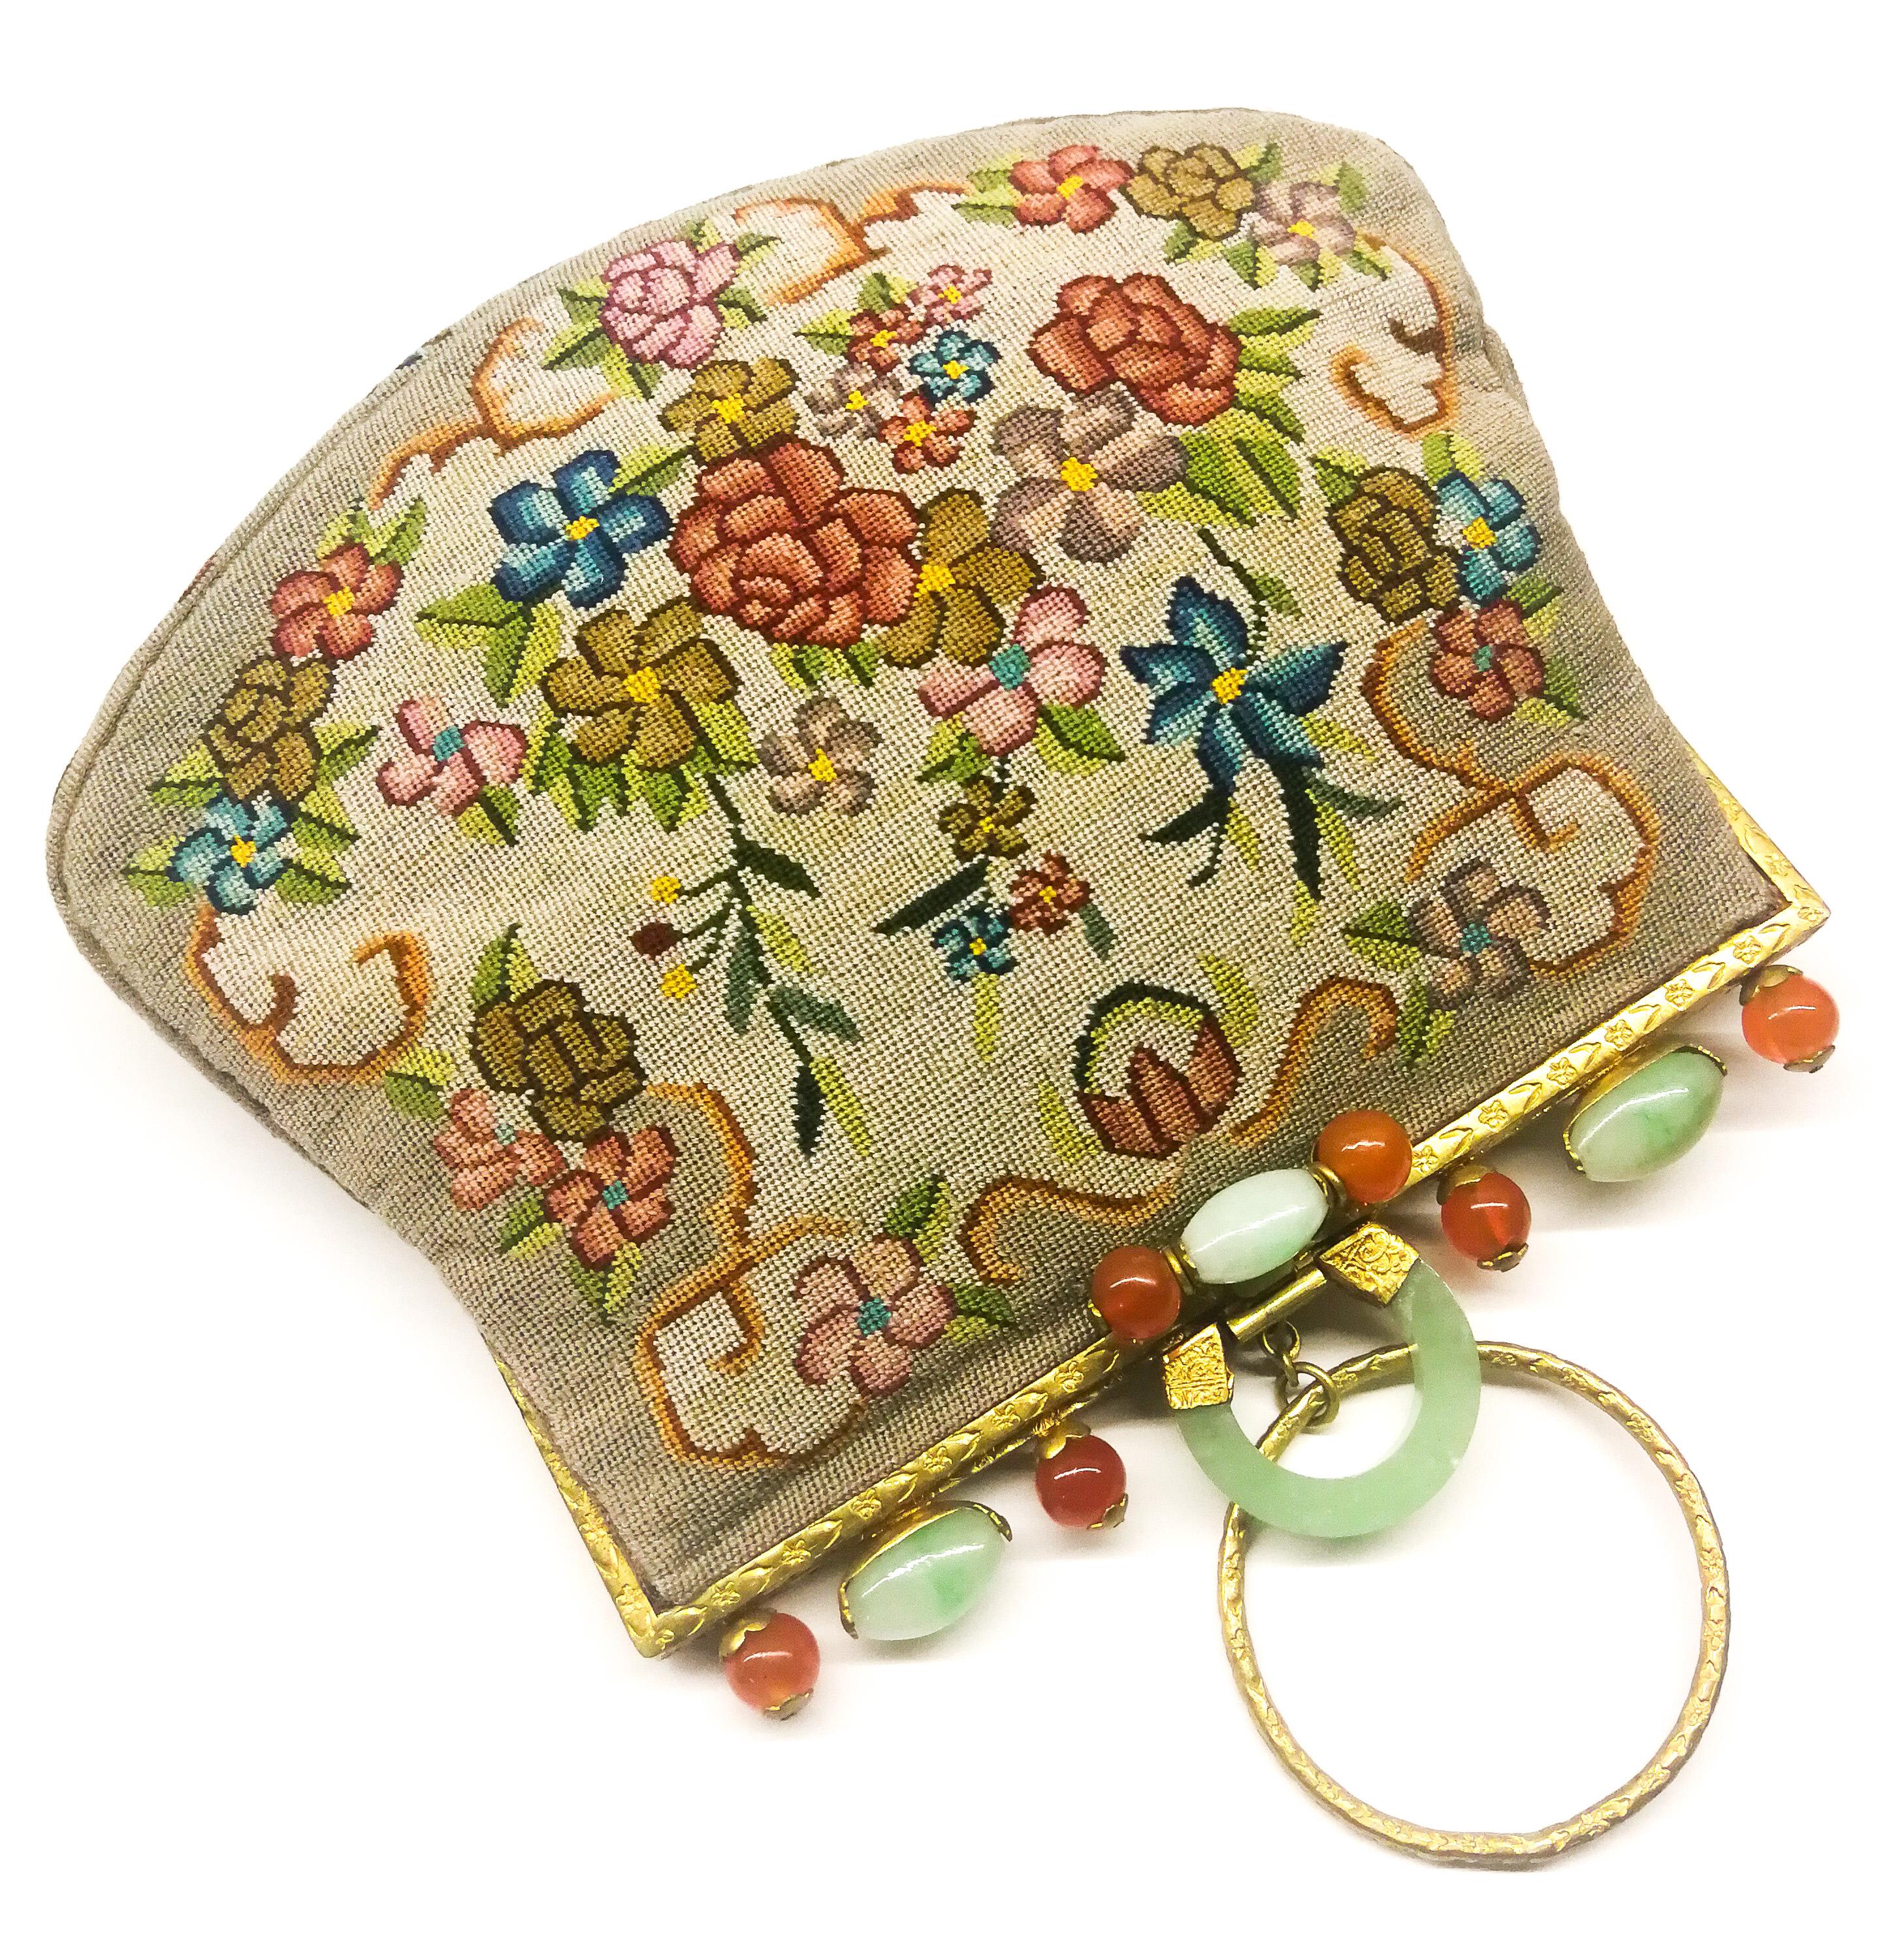 purses in the 1920s